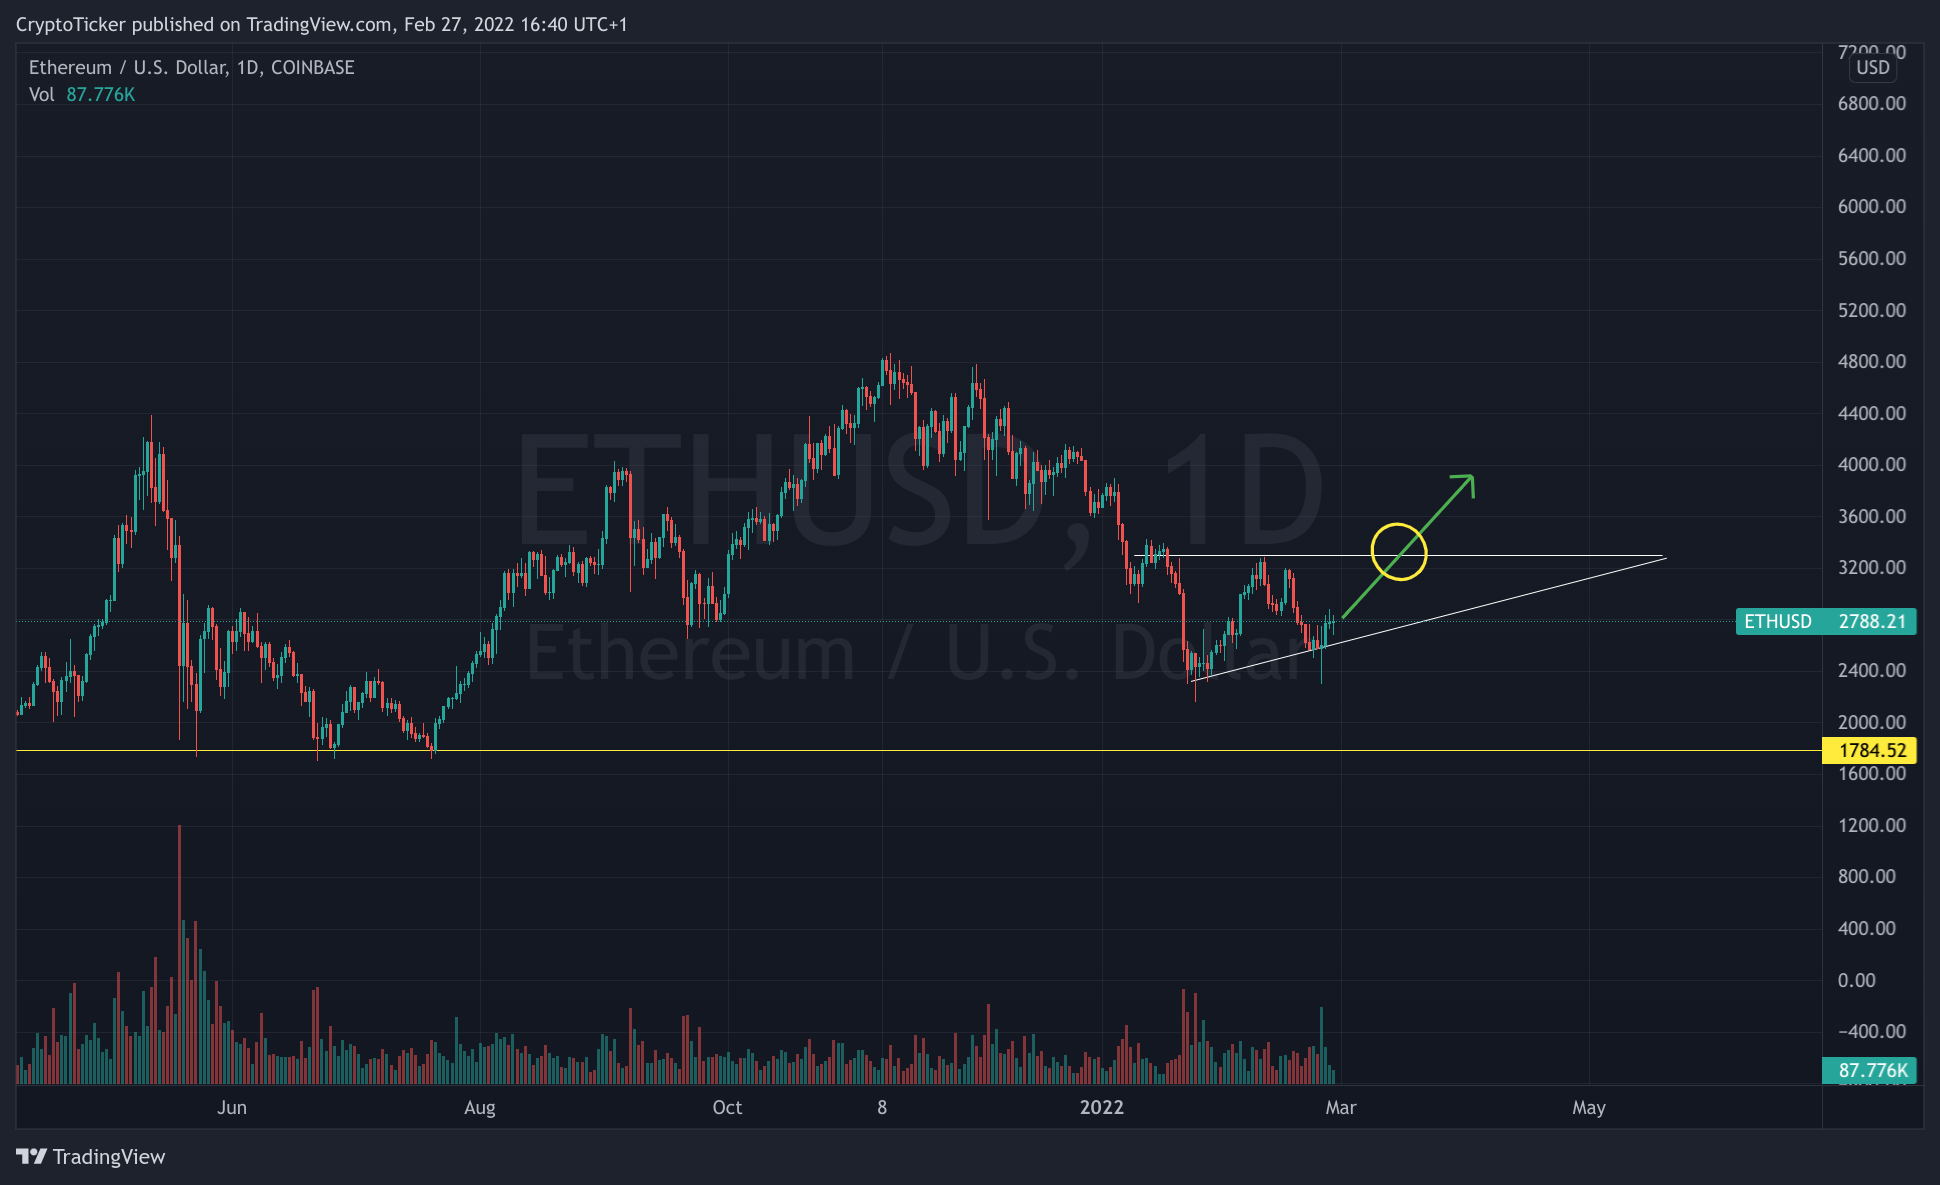 ETH/USD 1-day chart showing the potential break upwards